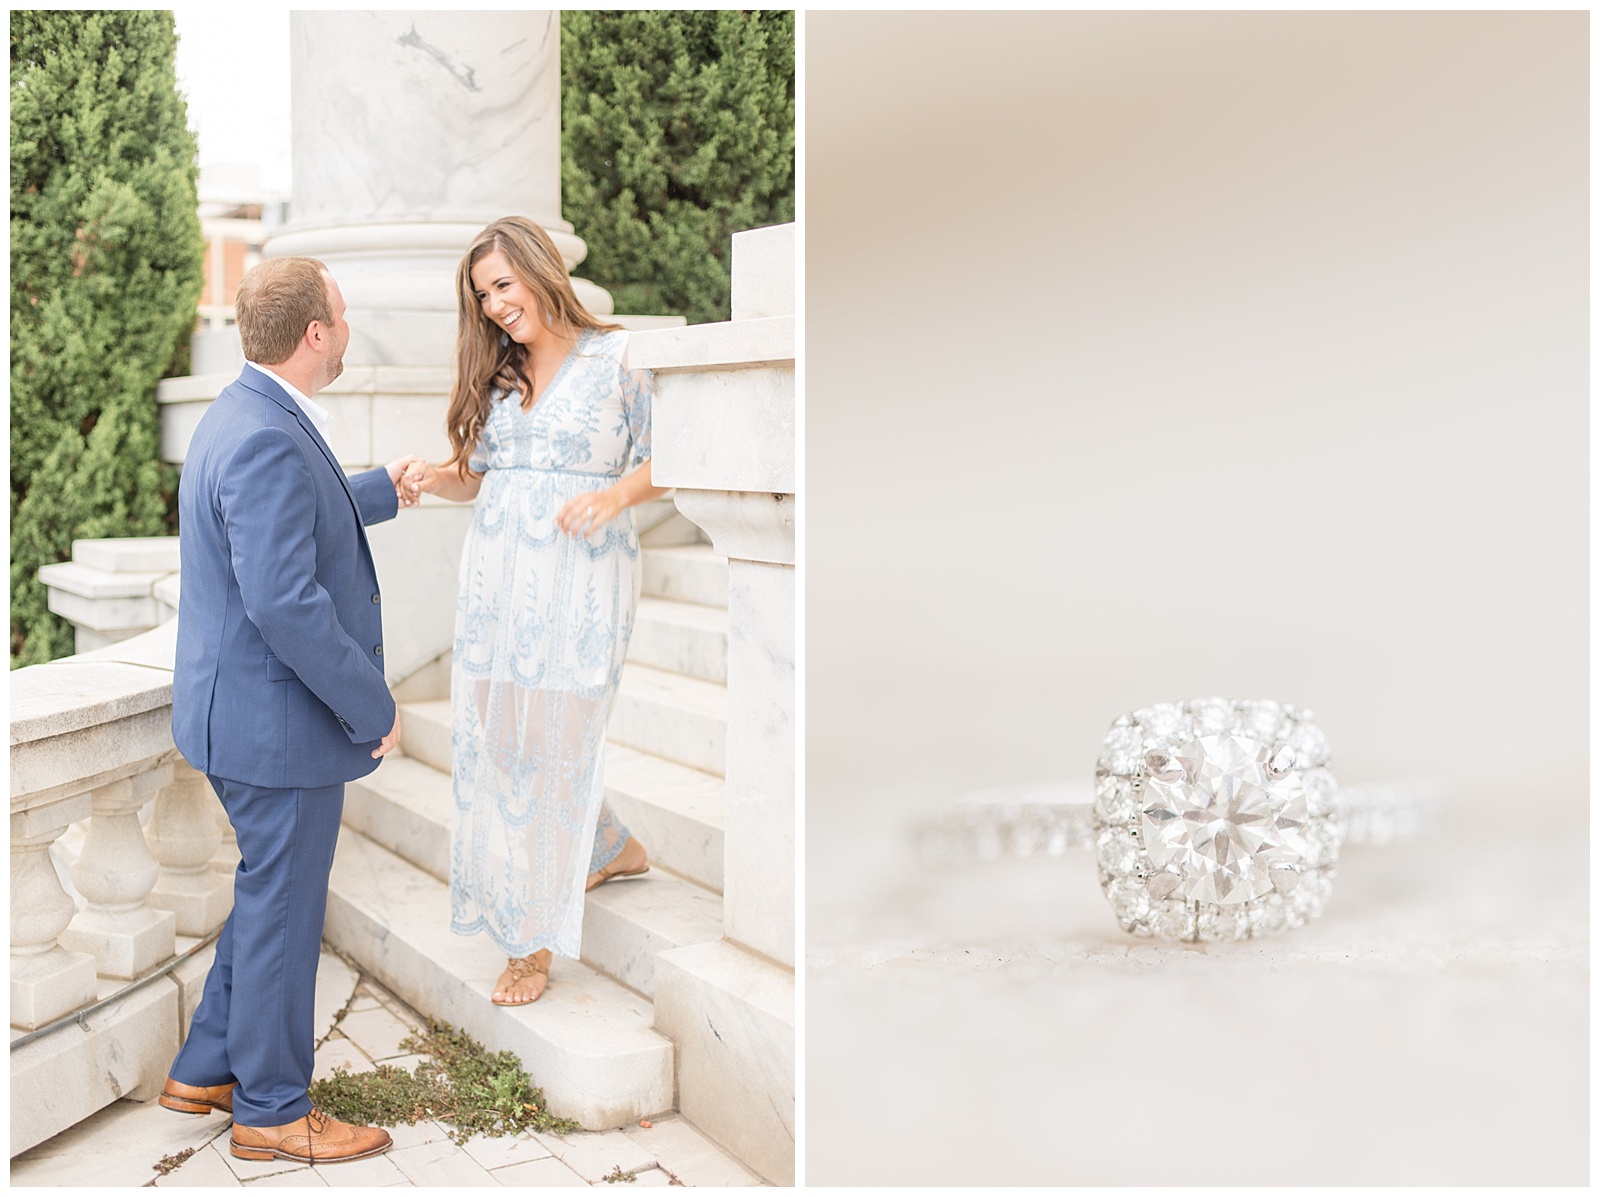 Engagement Series: Picking Your Outfit Get Dresses Up | Katie & Alec Photography \ Wedding Photographers in Birmingham, Alabama